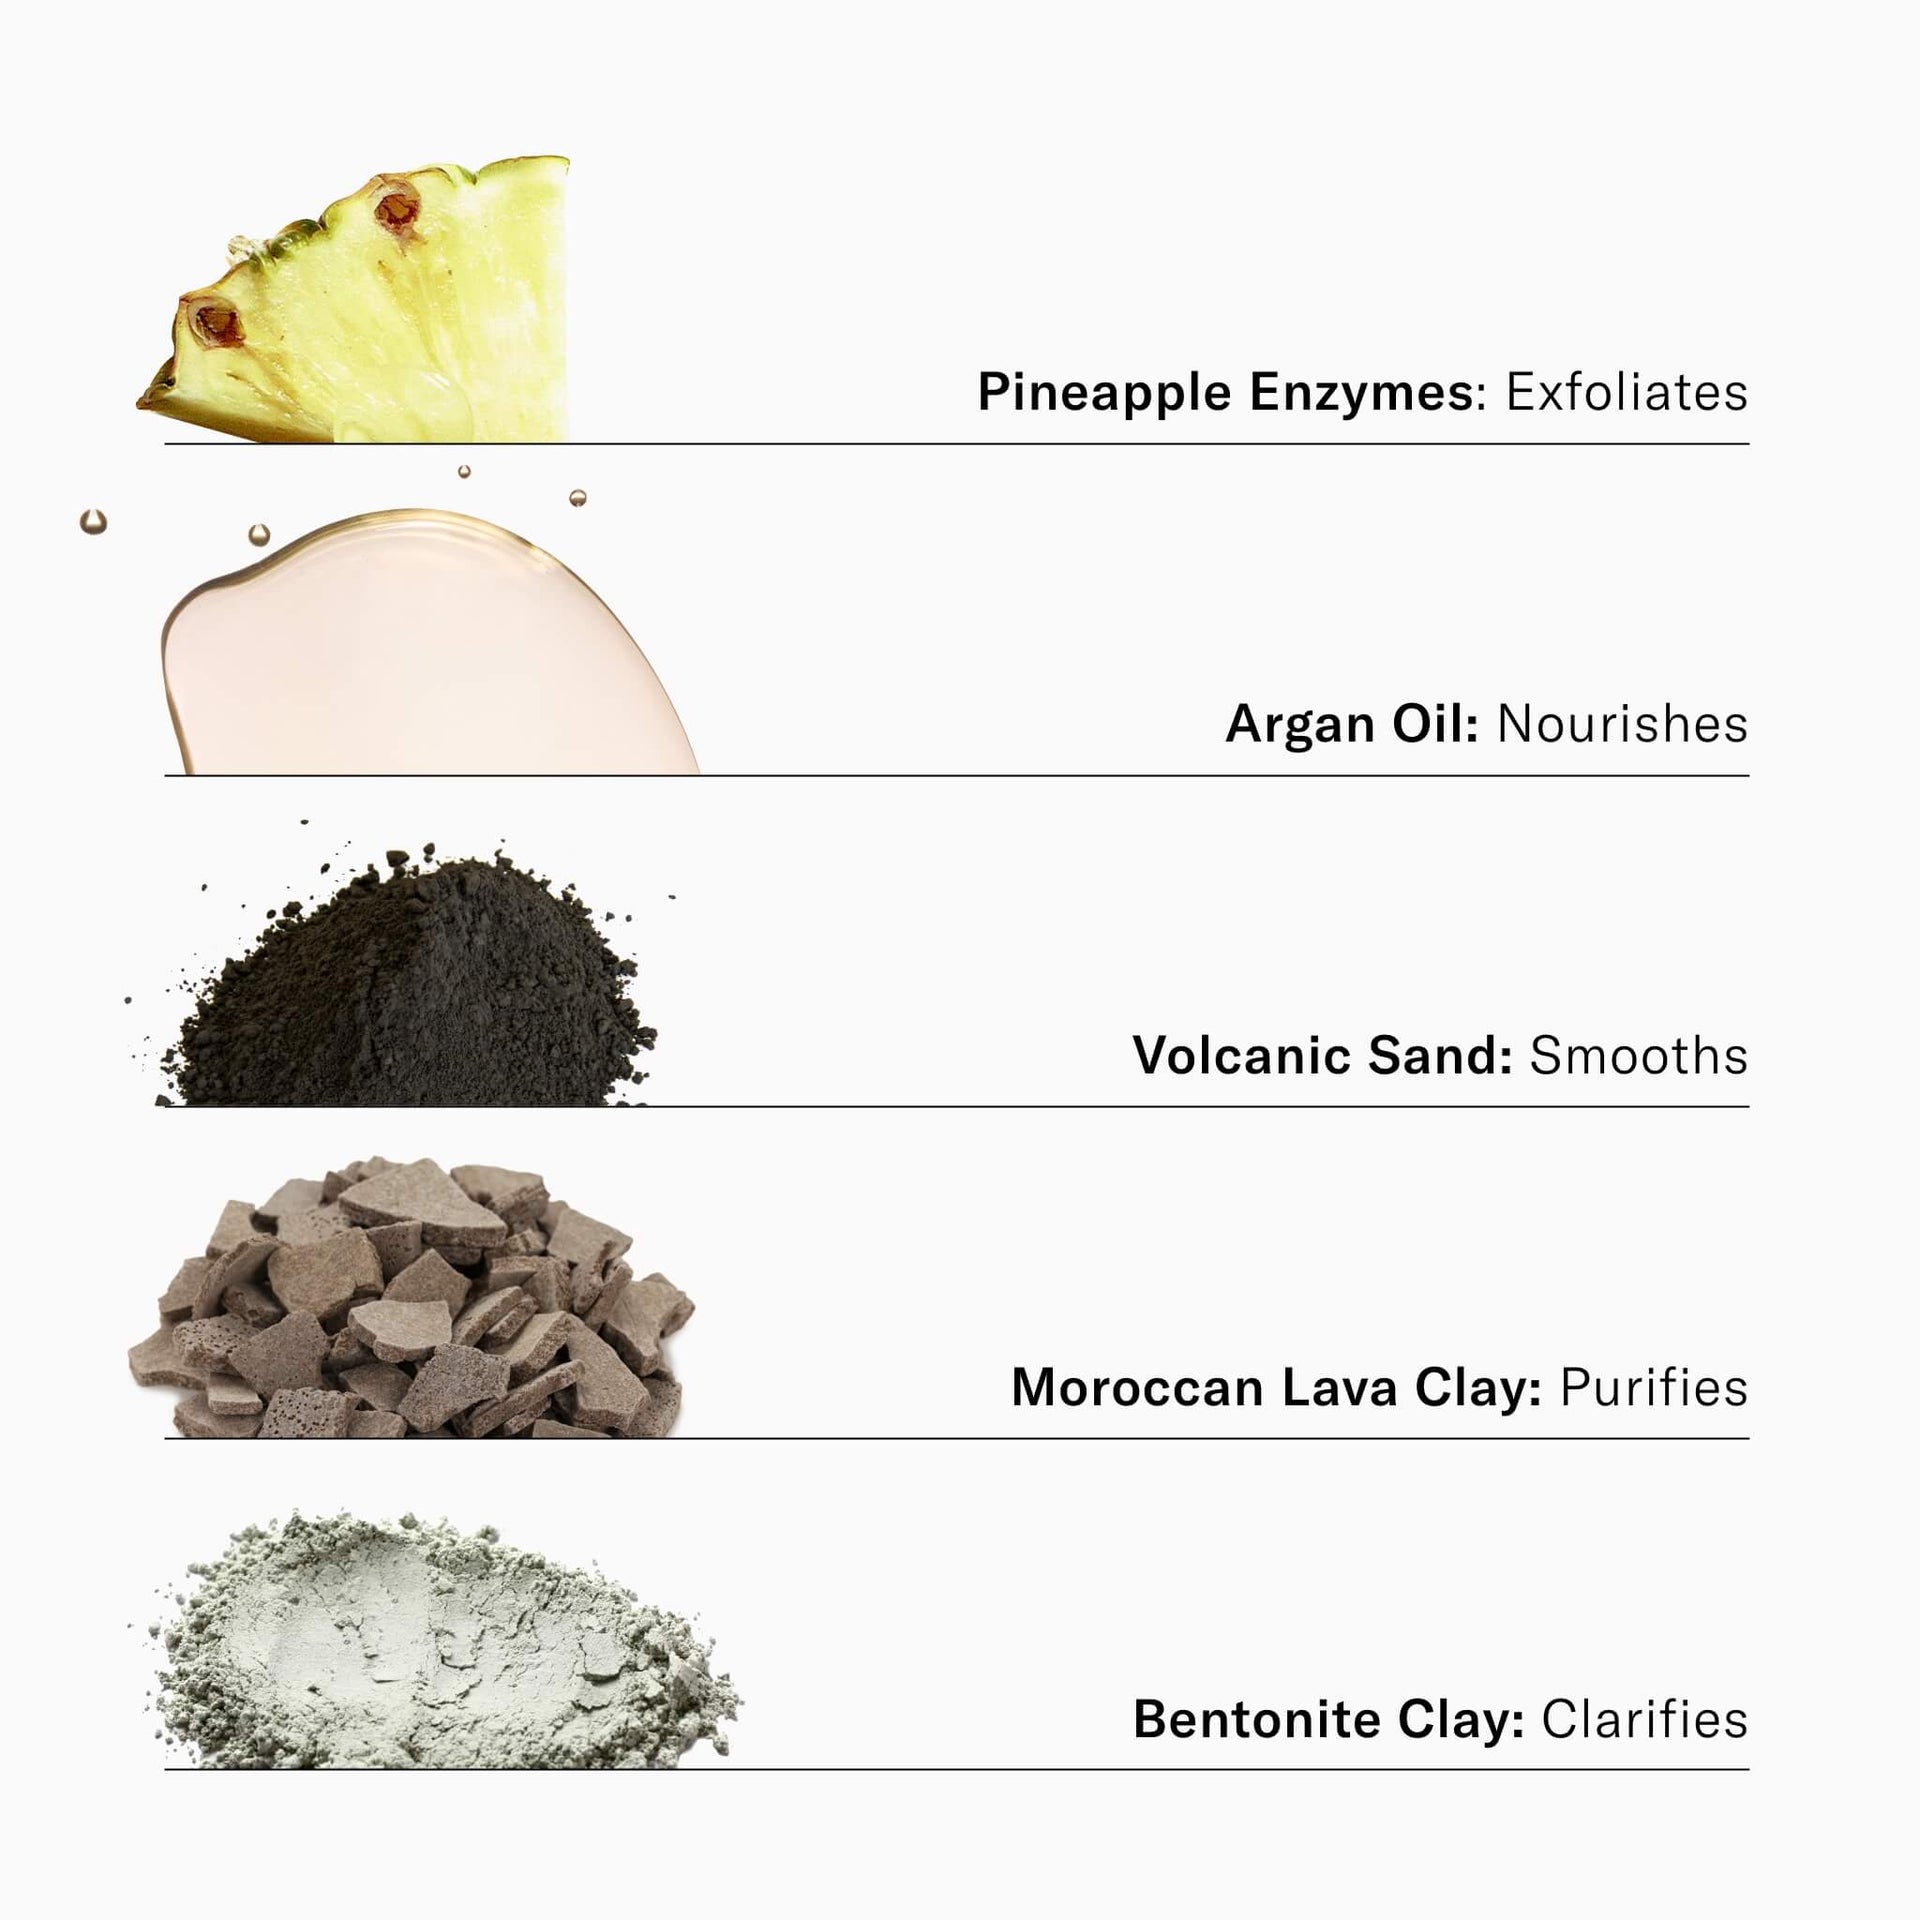 Ingredients. Pineapple Enzymes. Argan Oil. Volcanic Sand. Moroccan Lava Clay. Bentonite Clay.